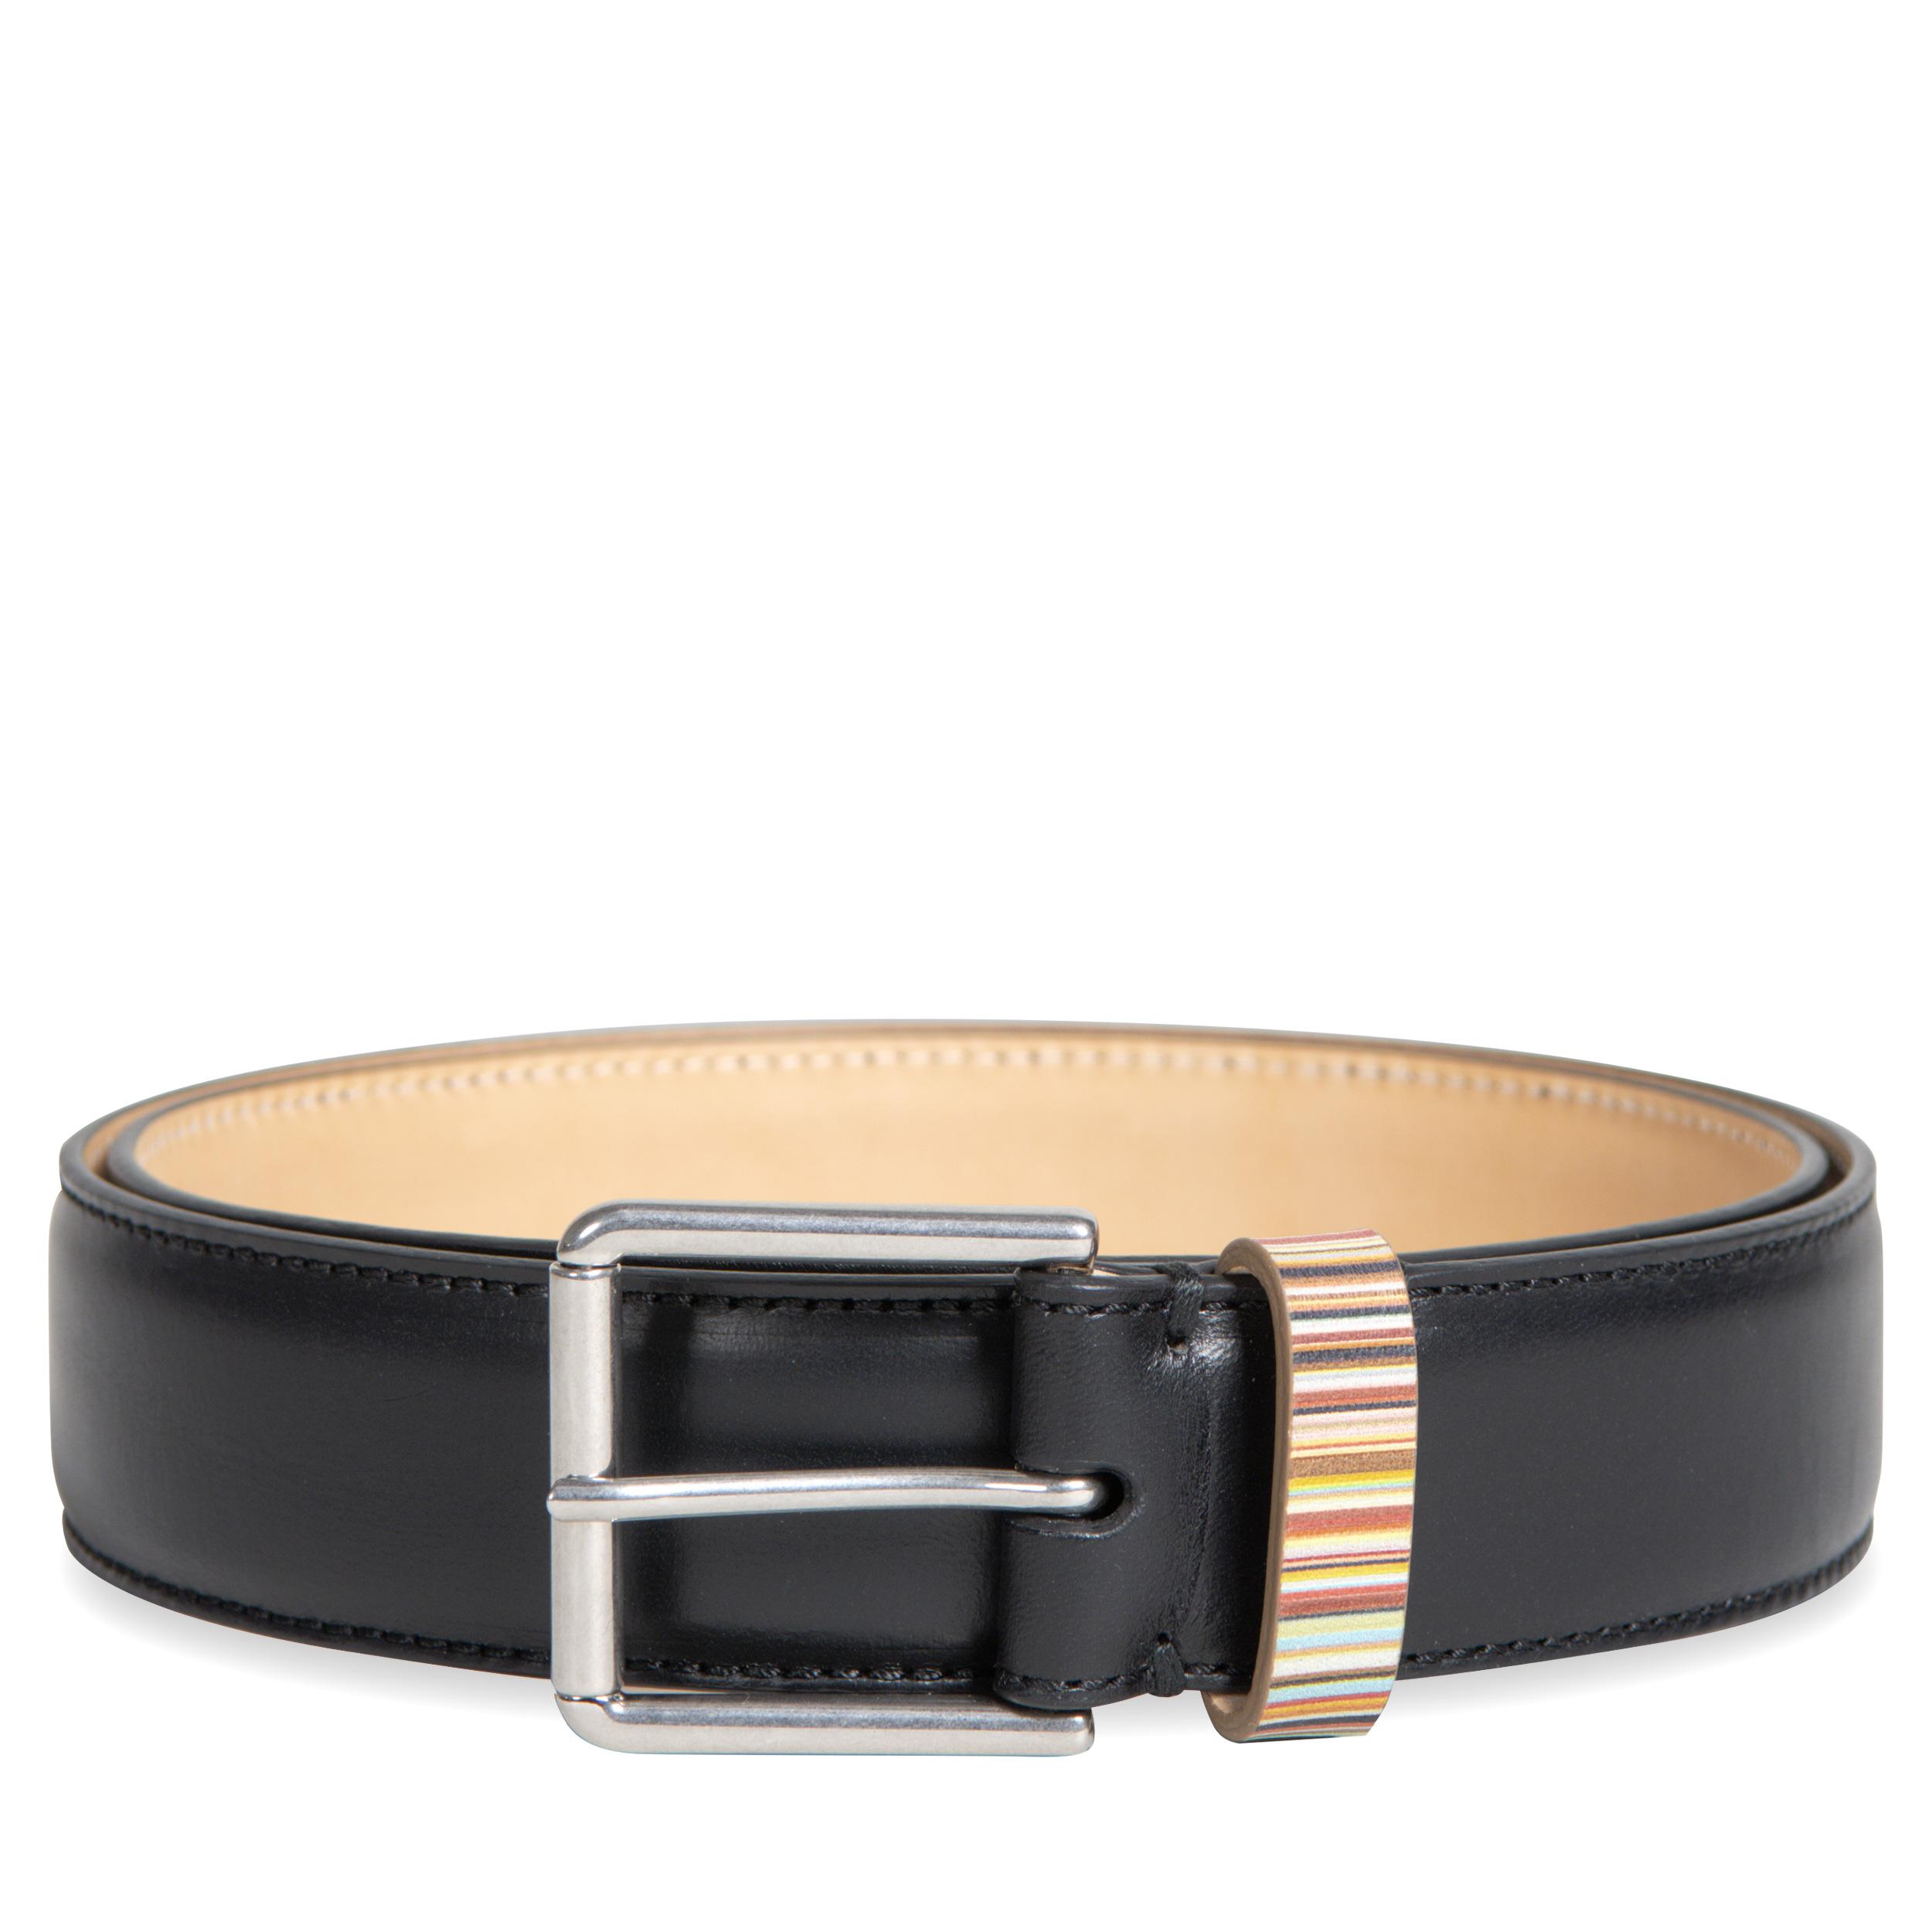 Paul Smith Signature Stripe Keeper Leather Belt in Black for Men - Save 60% - Lyst